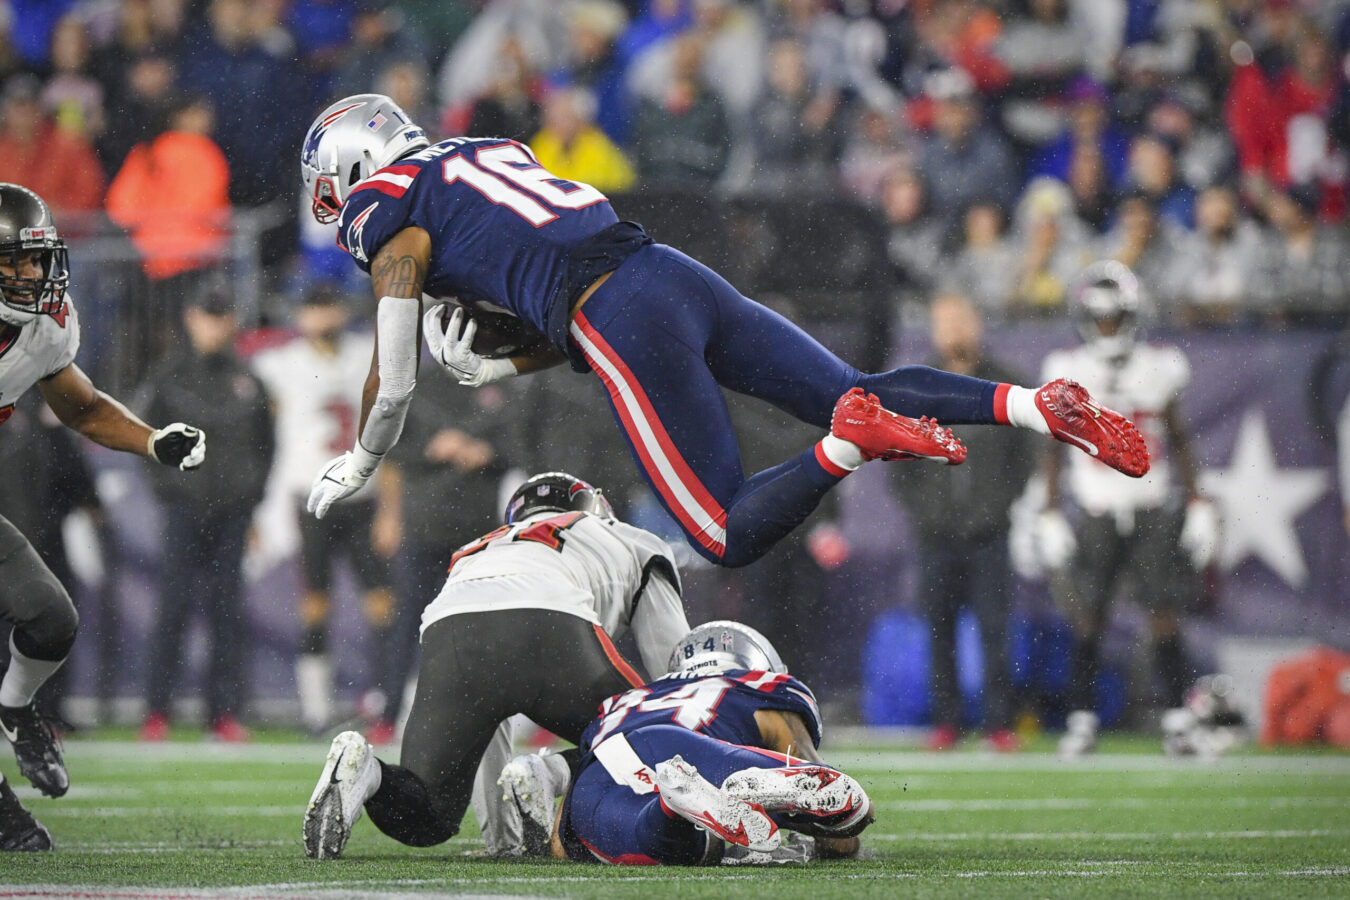 Oct 3, 2021; Foxboro, MA, USA; New England Patriots wide receiver Jakobi Meyers (16) dives with the ball against the Tampa Bay Buccaneers during the first quarter at Gillette Stadium. Mandatory Credit: Brian Fluharty-USA TODAY Sports